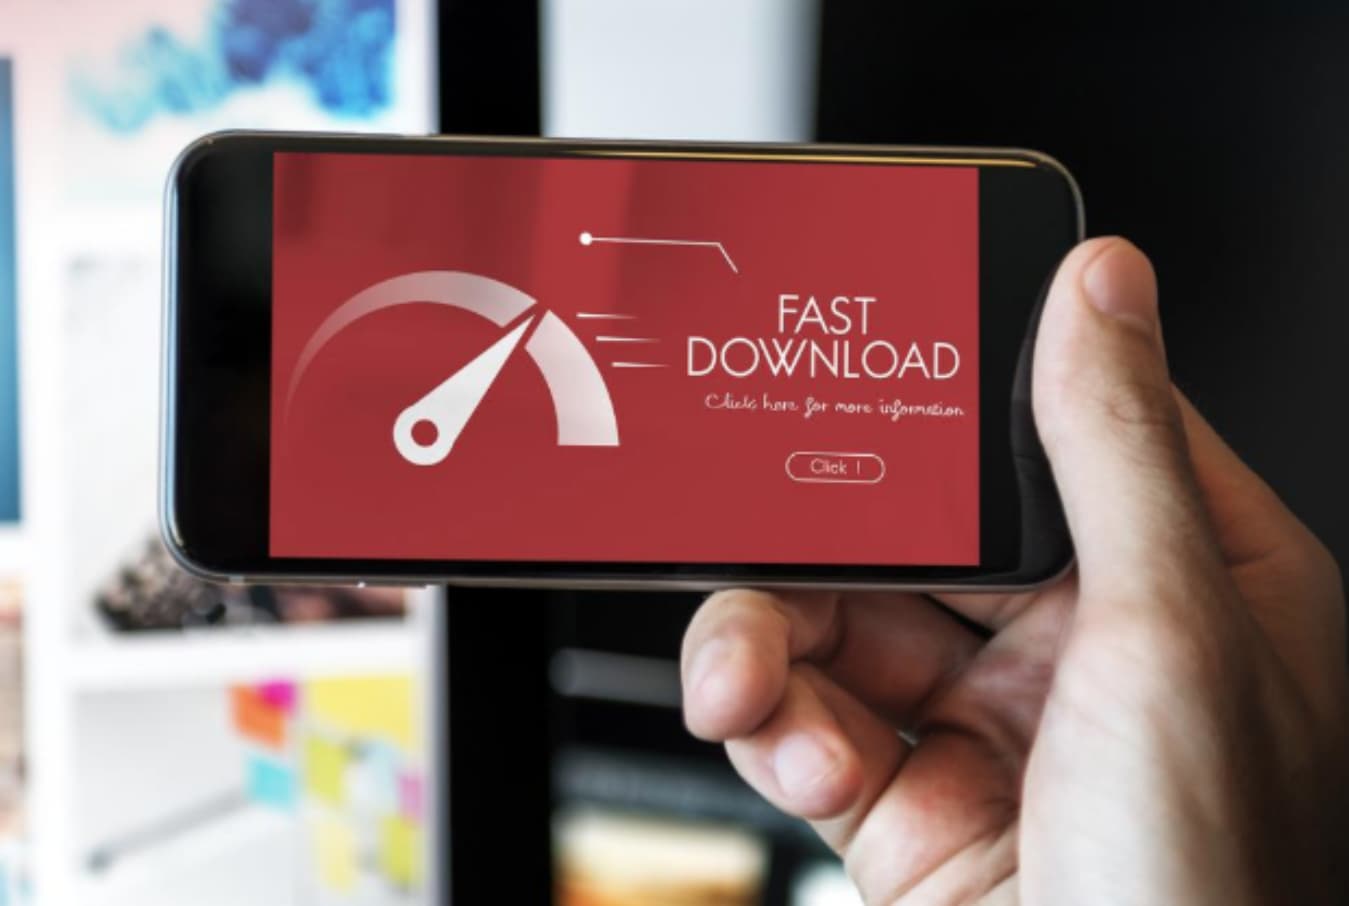 4 Helpful Tips to Make Your WiFi Fast and Efficient